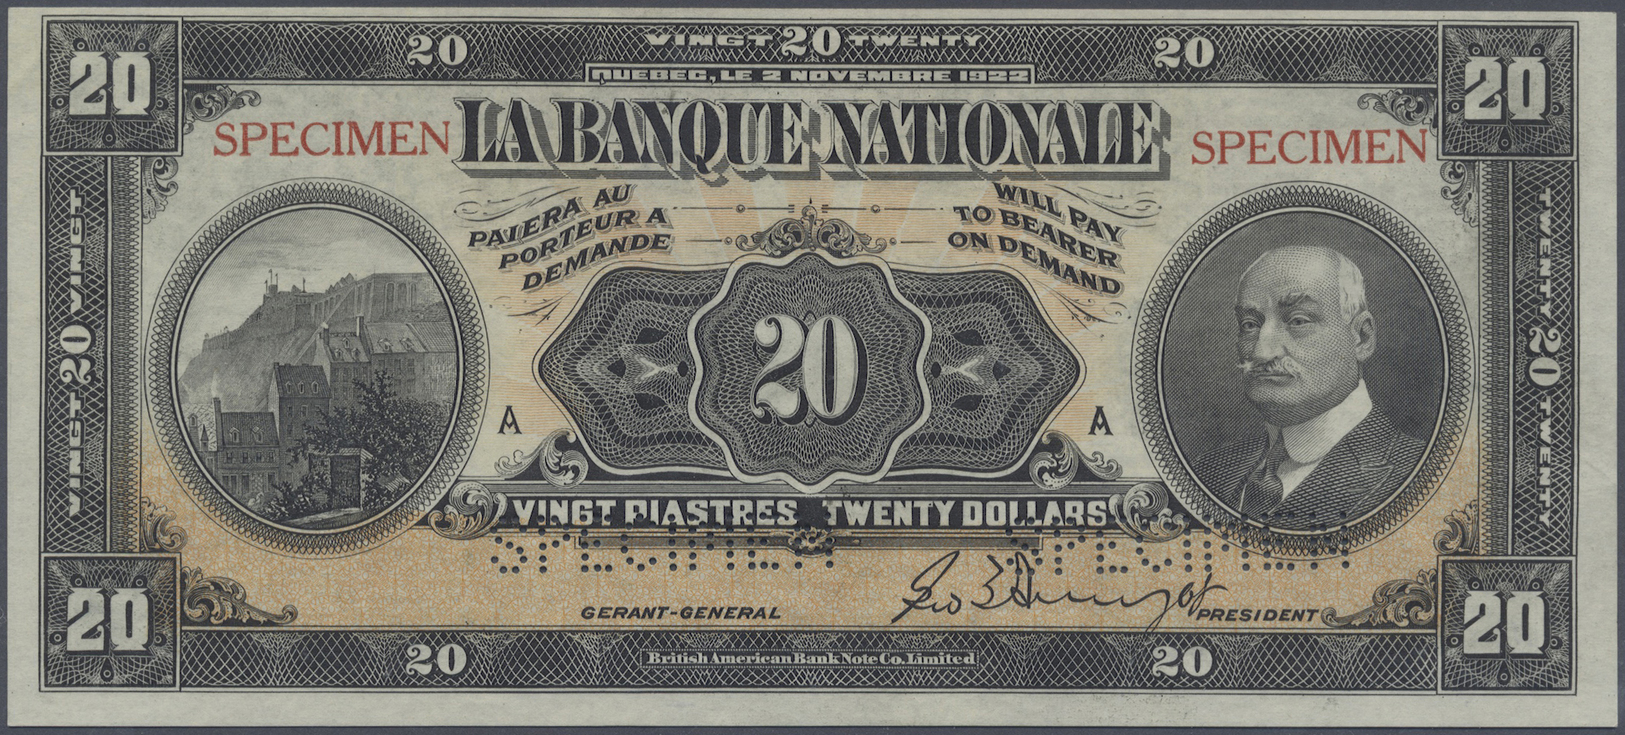 00484 Canada: 20 Dollars / 20 Piastres 1922 Specimen P. S873s Issued By "La Banque Nationale" With Two "Specimen" Perfor - Canada